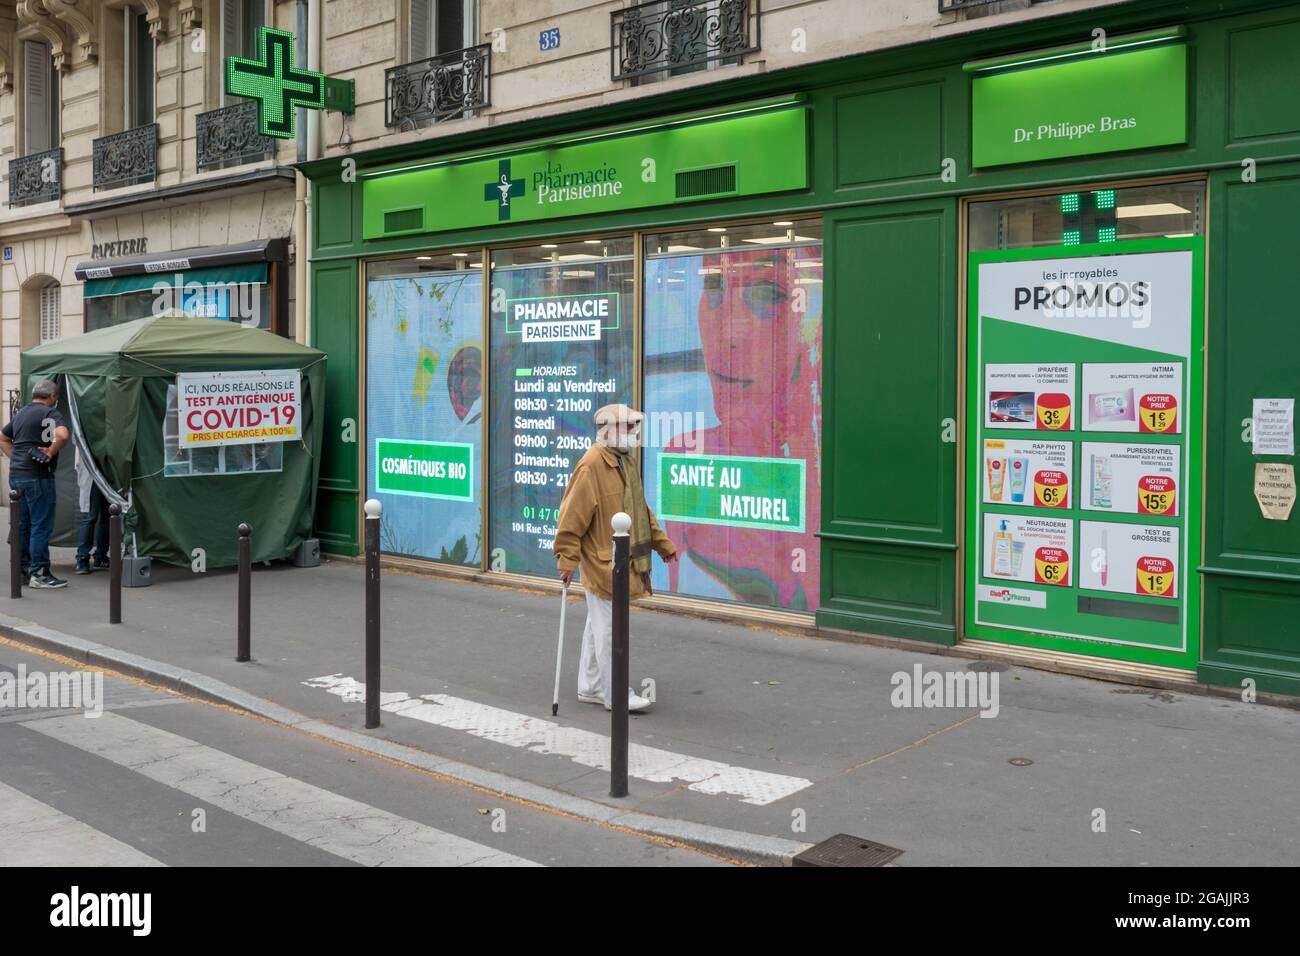 PAR, FRANCE - Jul 08, 2021: A Pharmacy building facade with Covid19 testing center tent in Paris, France Stock Photo